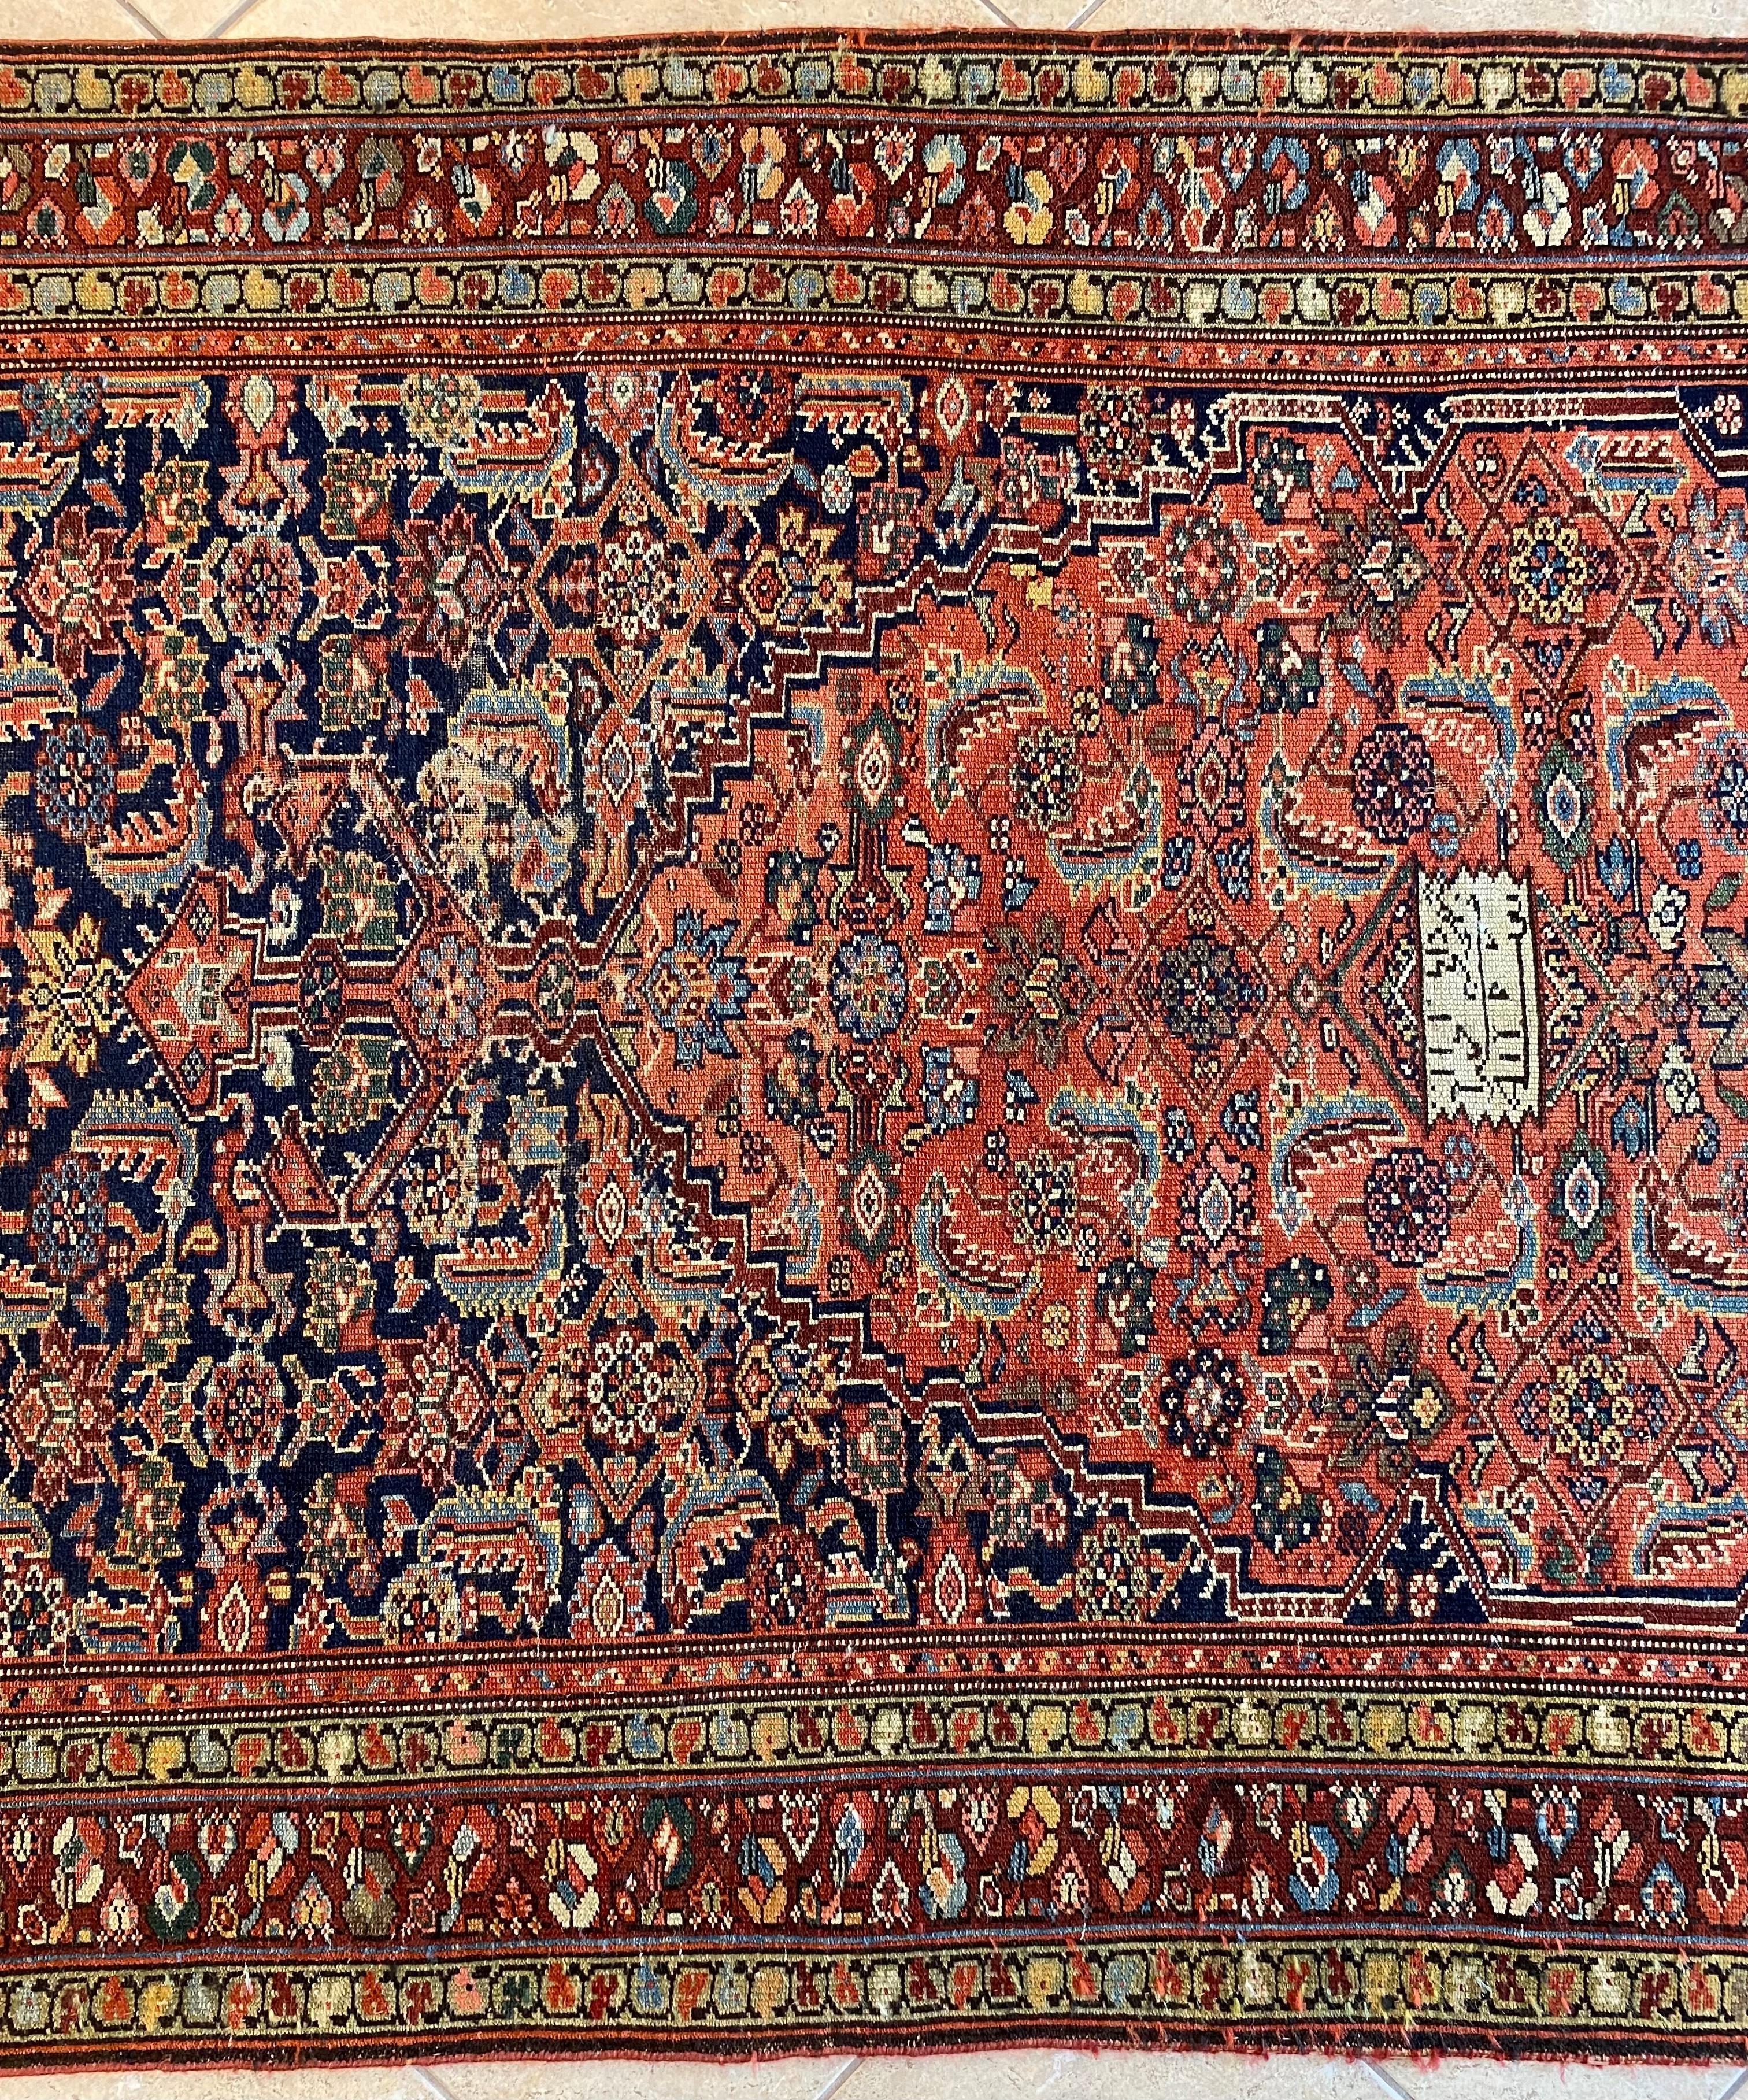 This captivating antique hand-knotted wool runner rug, possibly woven in the late 19th or early 20th century, showcases the enduring artistry of traditional rug-making. The central medallion design in rich rust and blue tones is complemented by